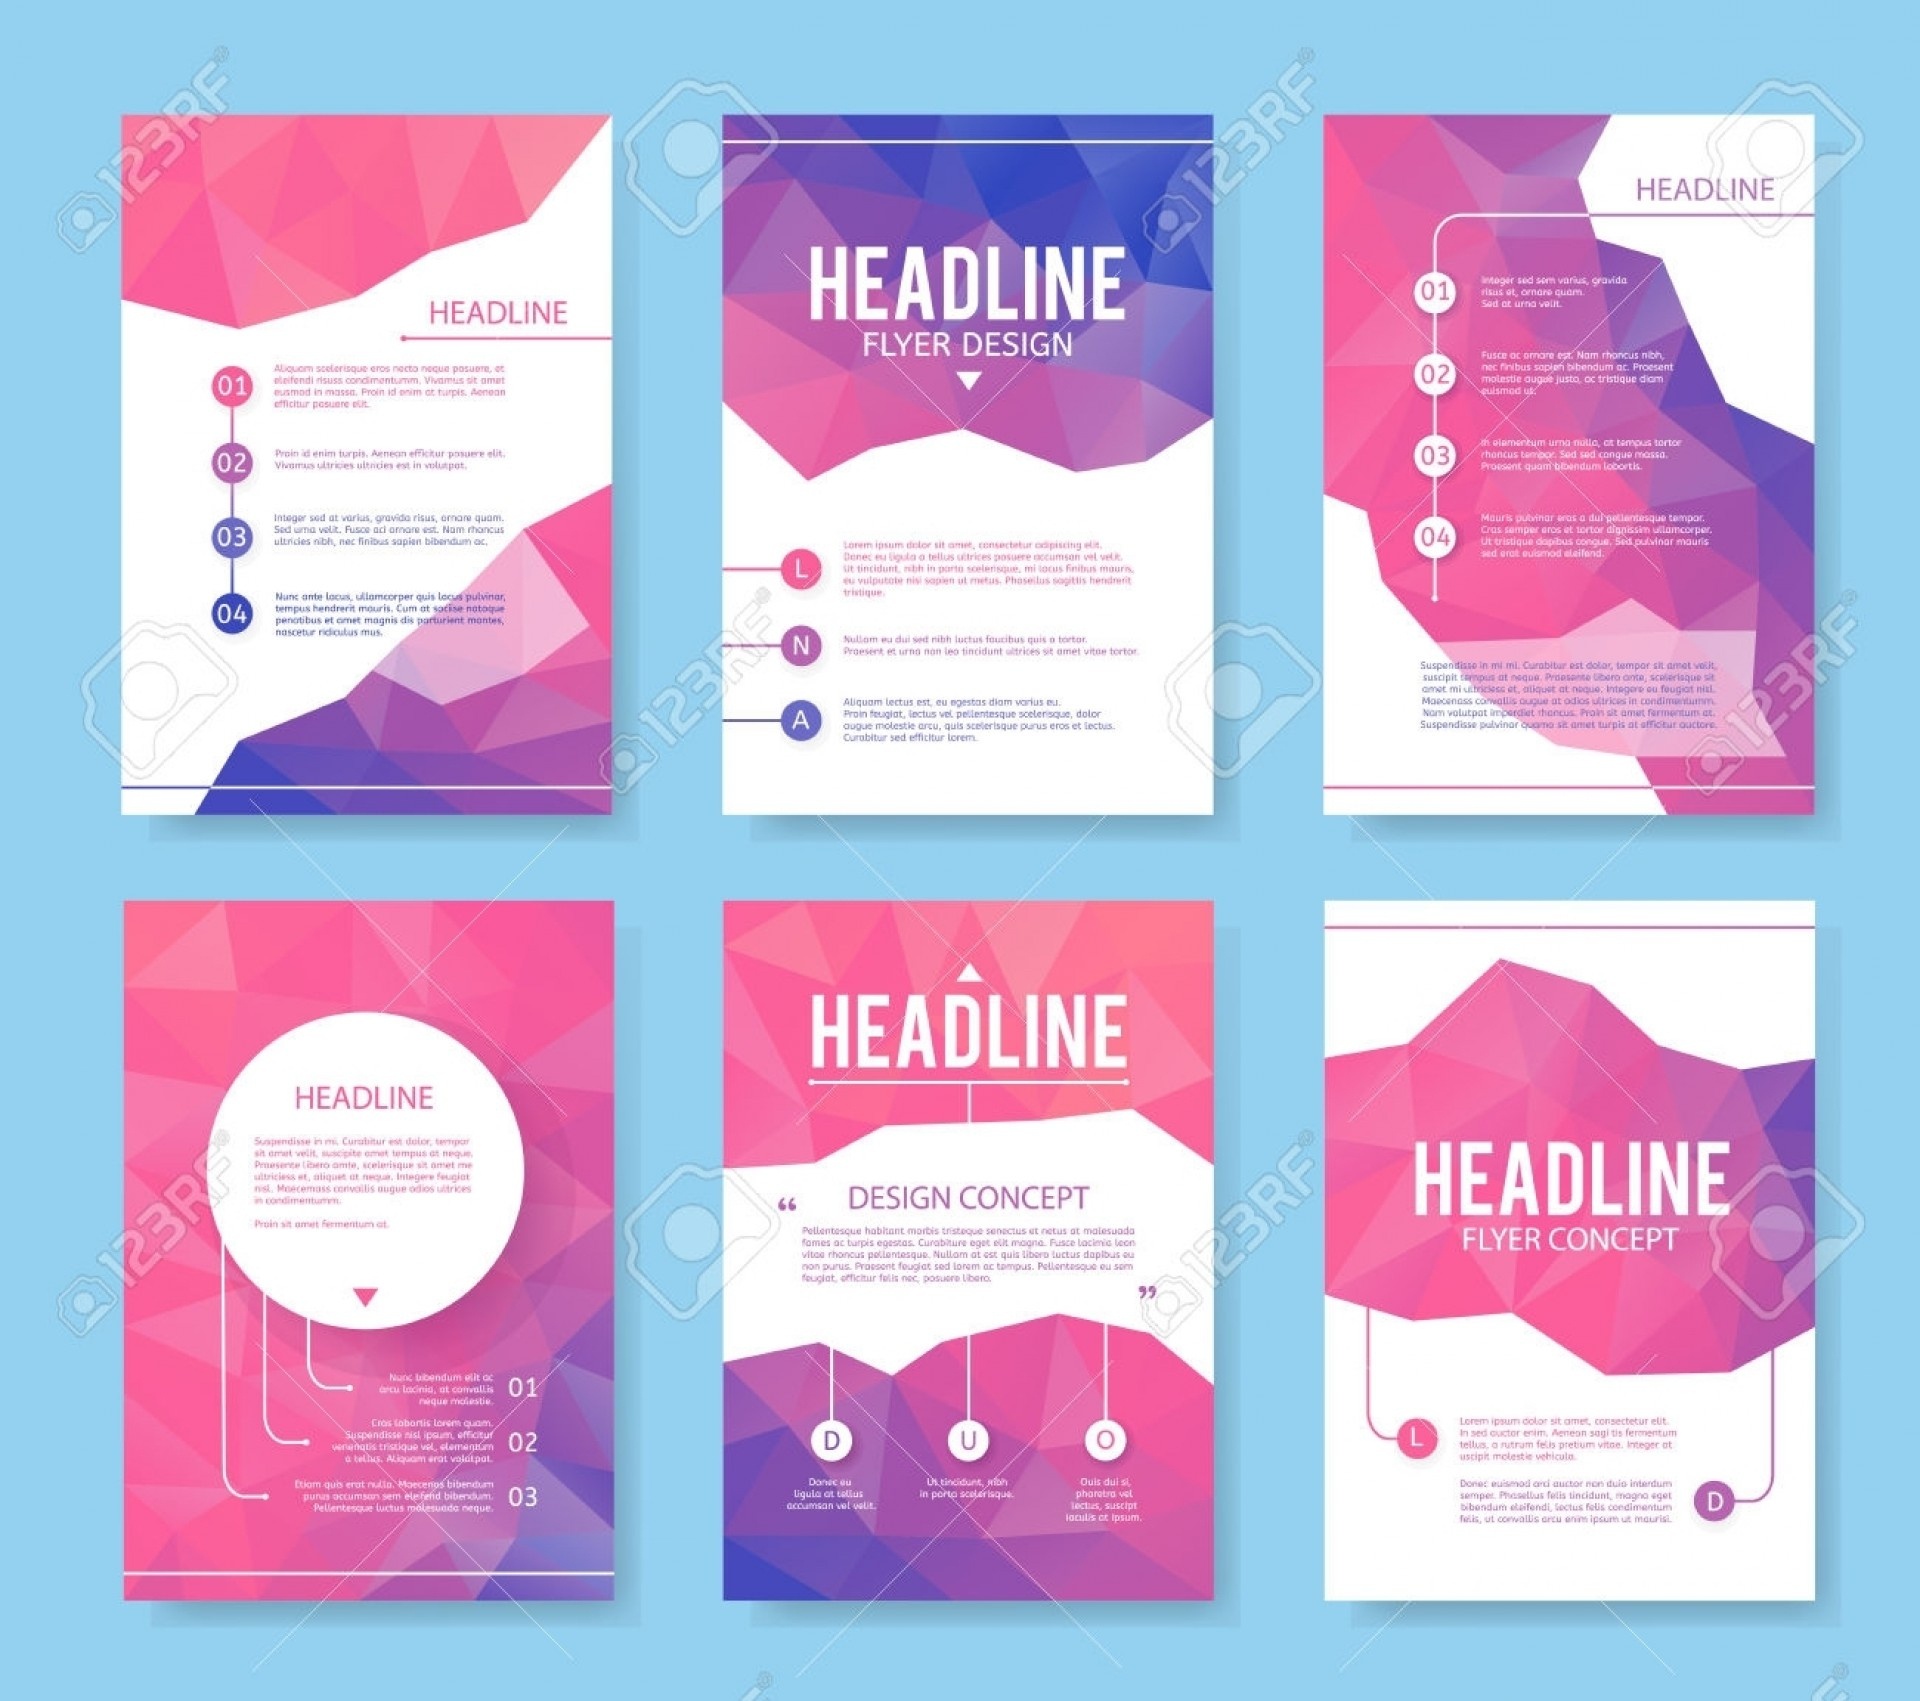 free-psd-flyer-template-download-template-flyer-free-psd-flyer